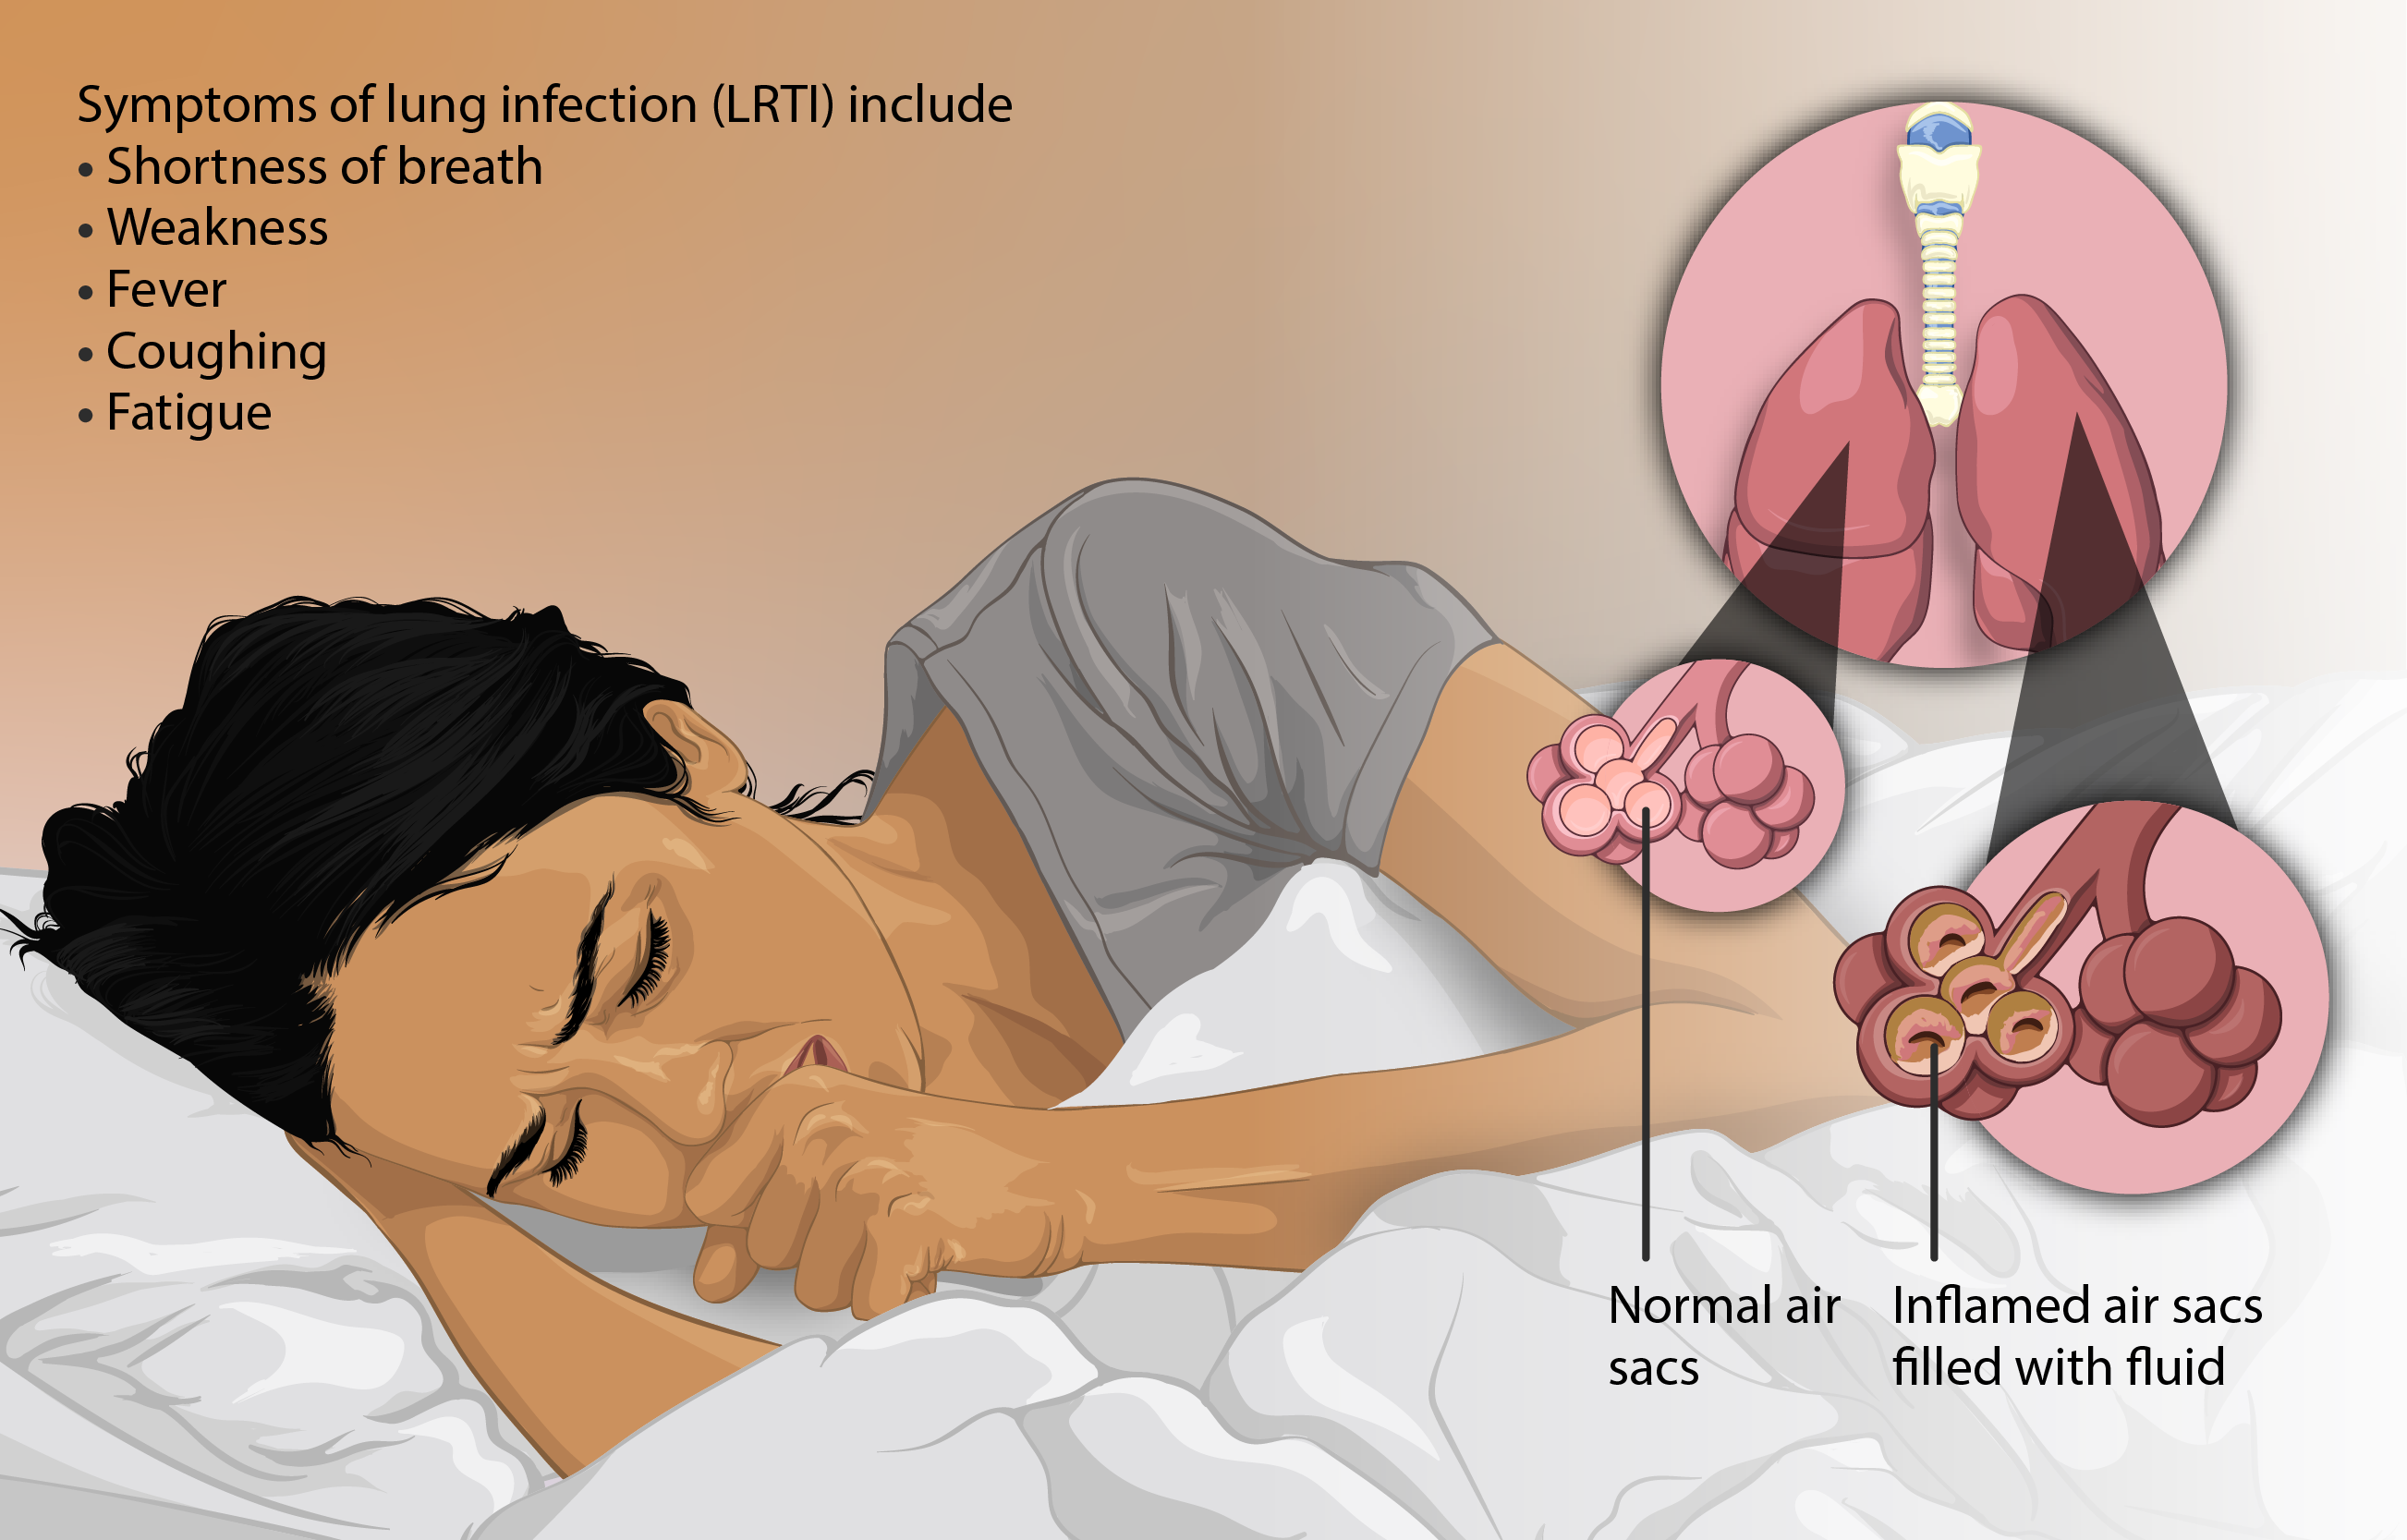 Respiratory tract infections 